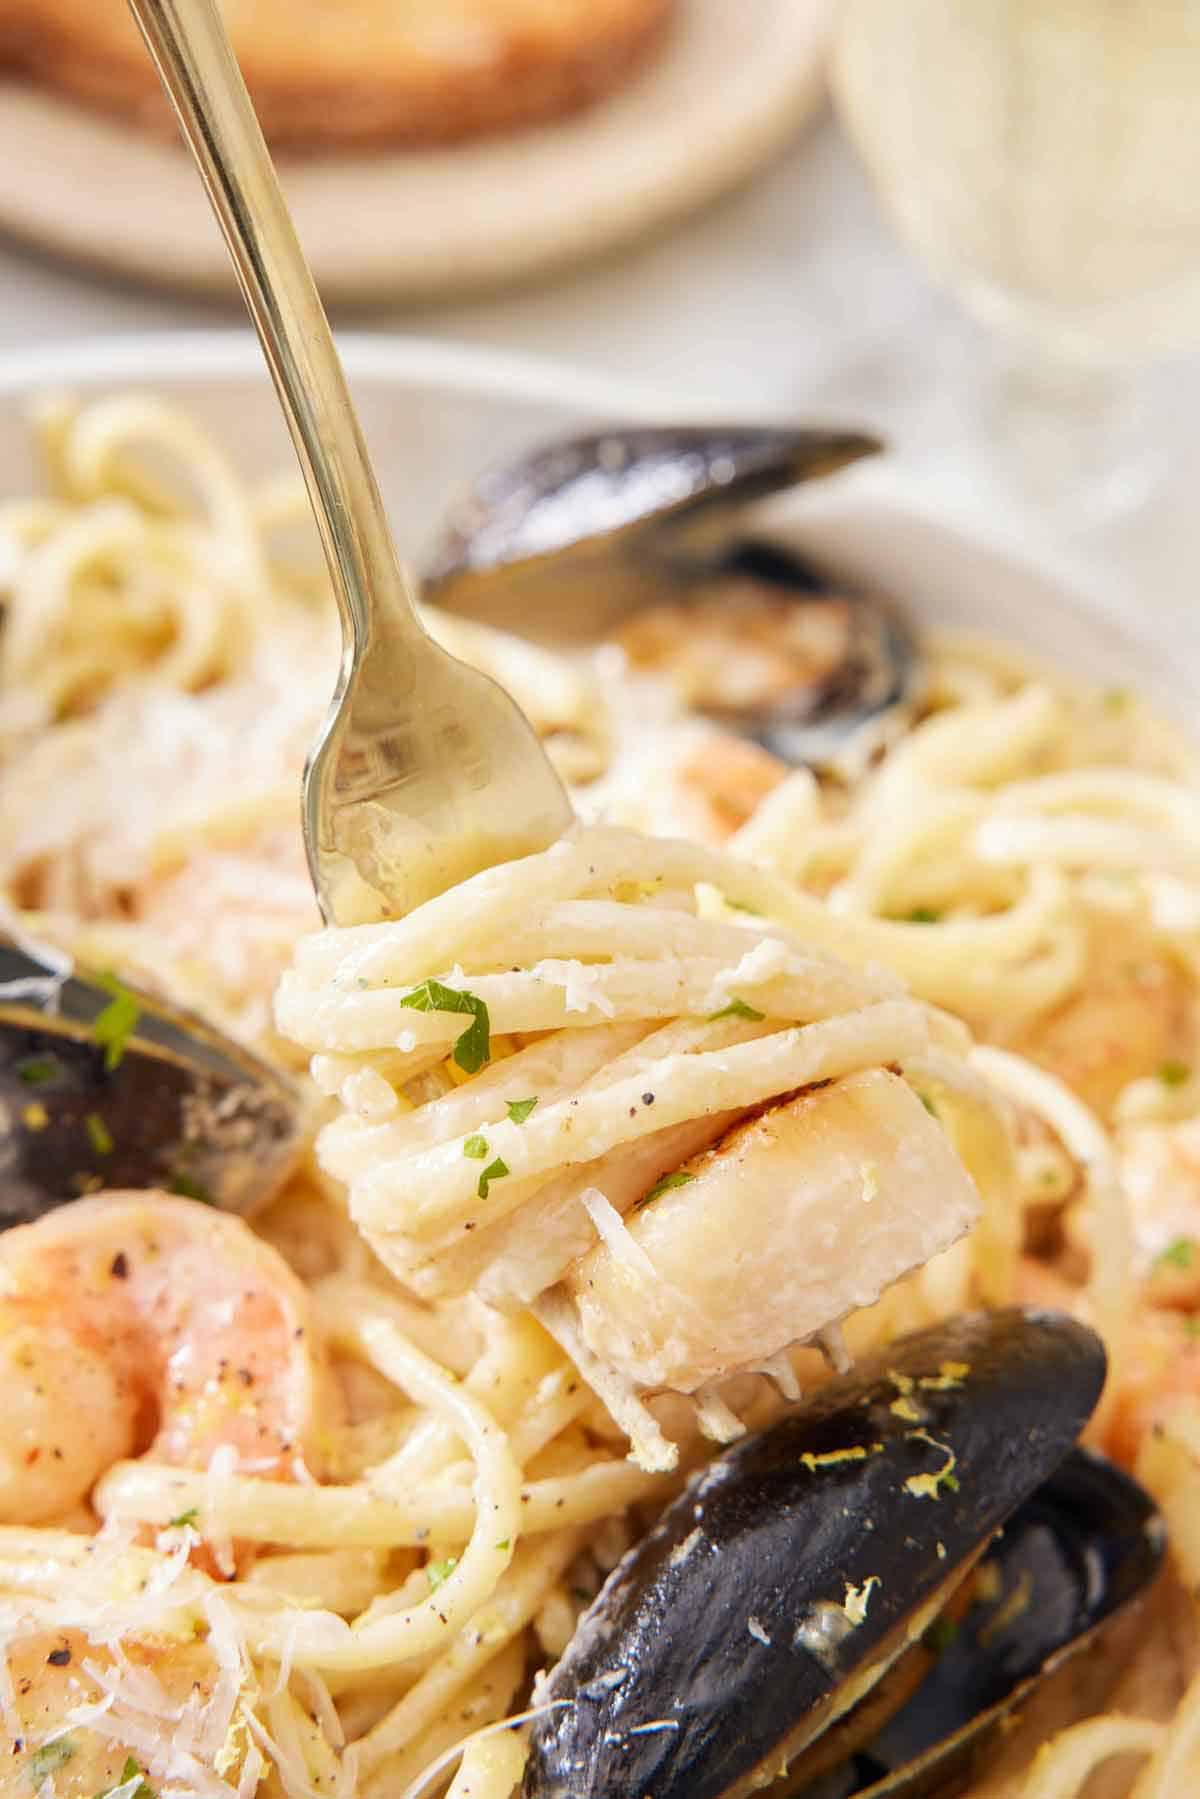 A forkful of seafood pasta lifted from a plate.